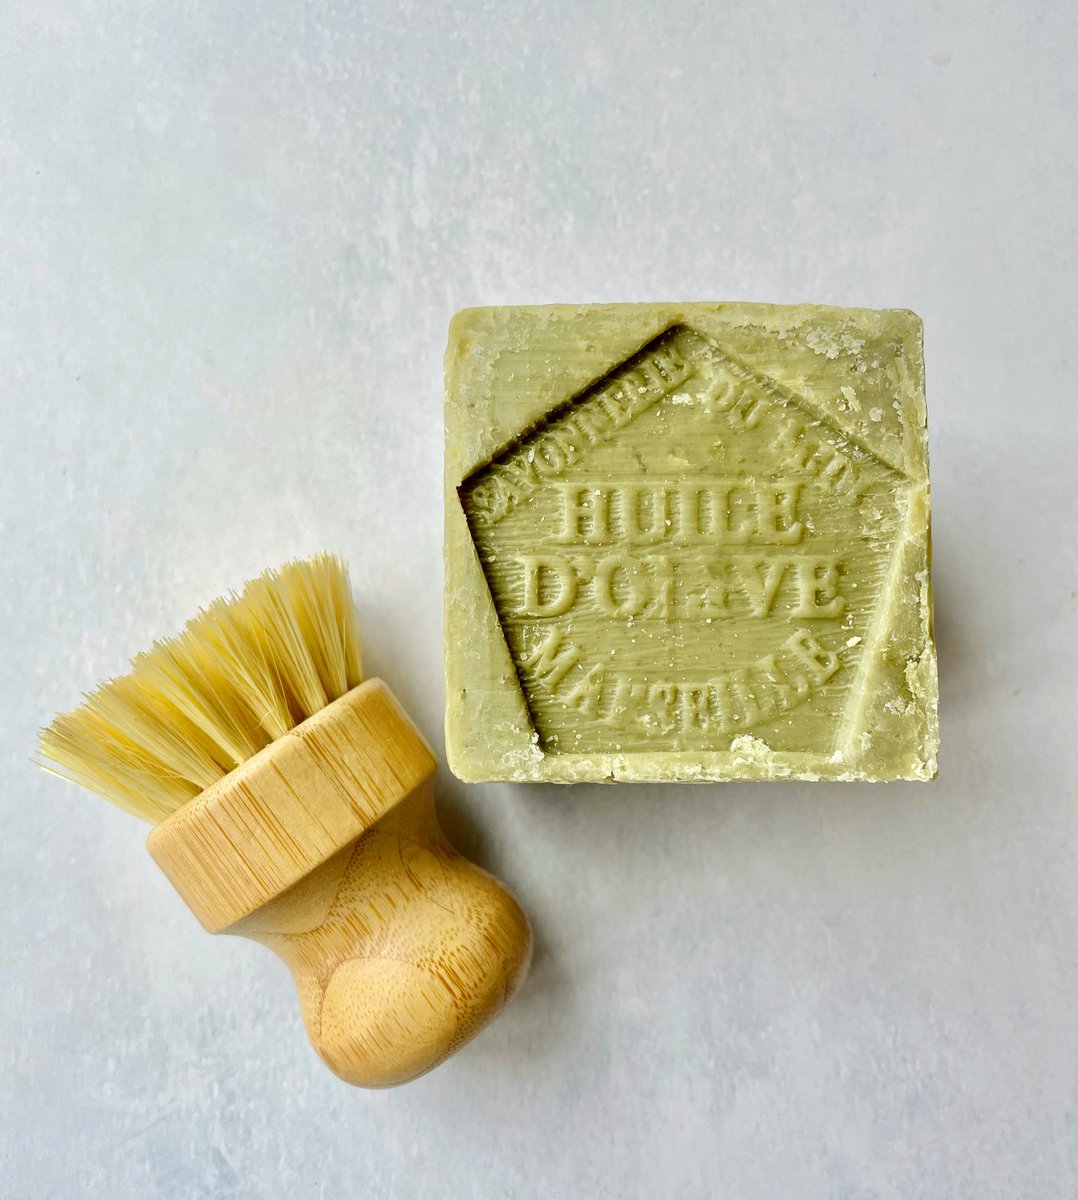 Marseille soap - traditionally, the soap is made by mixing sea water from the Mediterranean Sea, olive oil, and the alkaline ash from sea plants together - for 600 years now.
refillogic.co.uk/organic-marsei…
#elevenseshour #mhhsbd #naturalcleaning